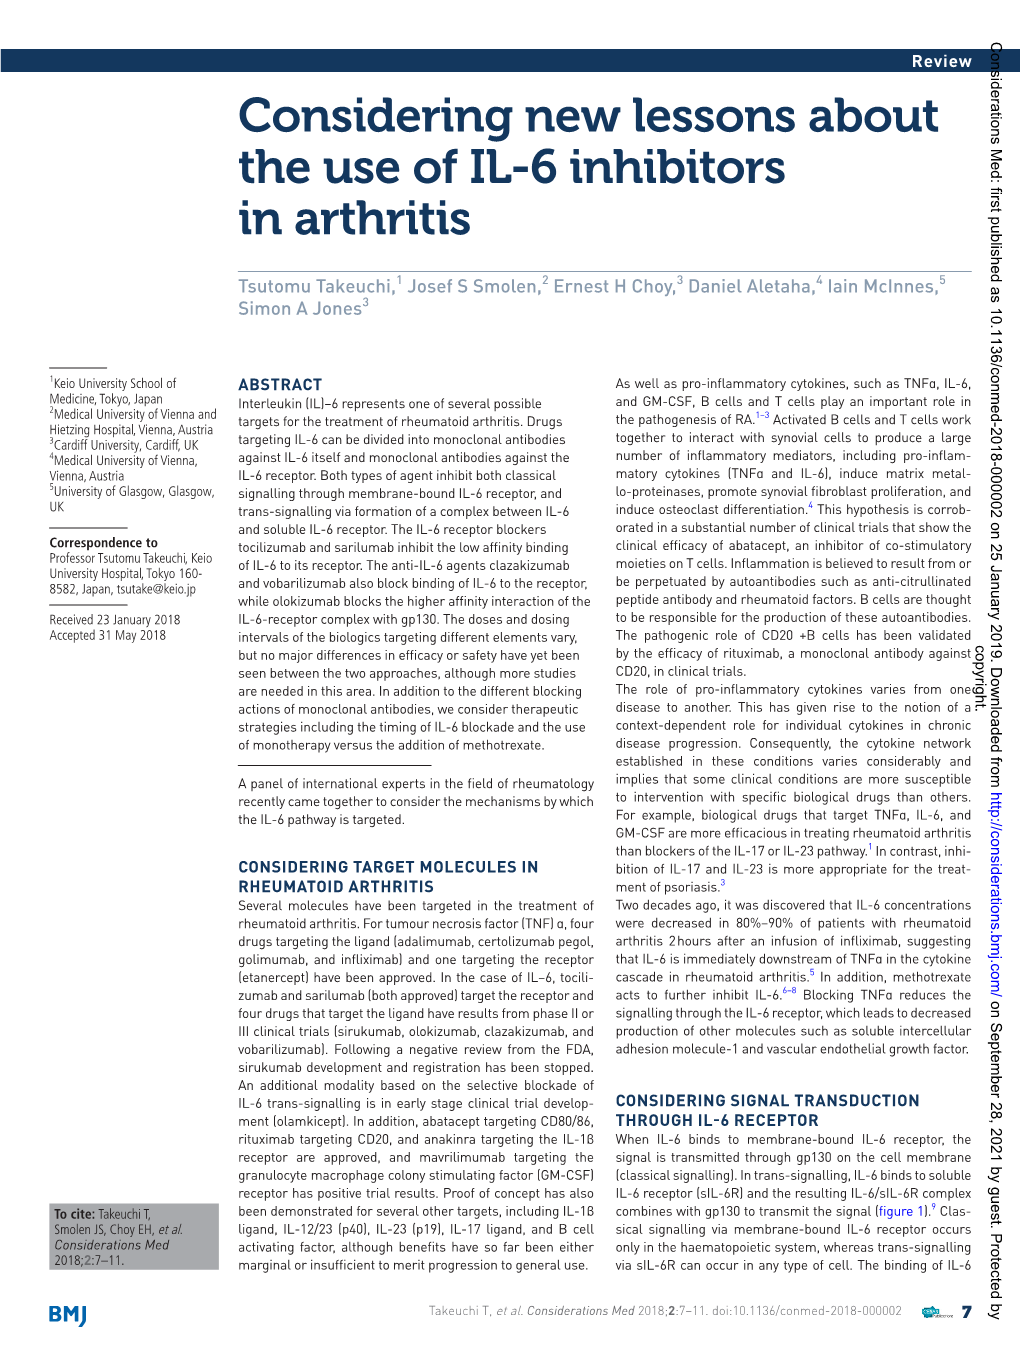 Considering New Lessons About the Use of IL-6 Inhibitors in Arthritis